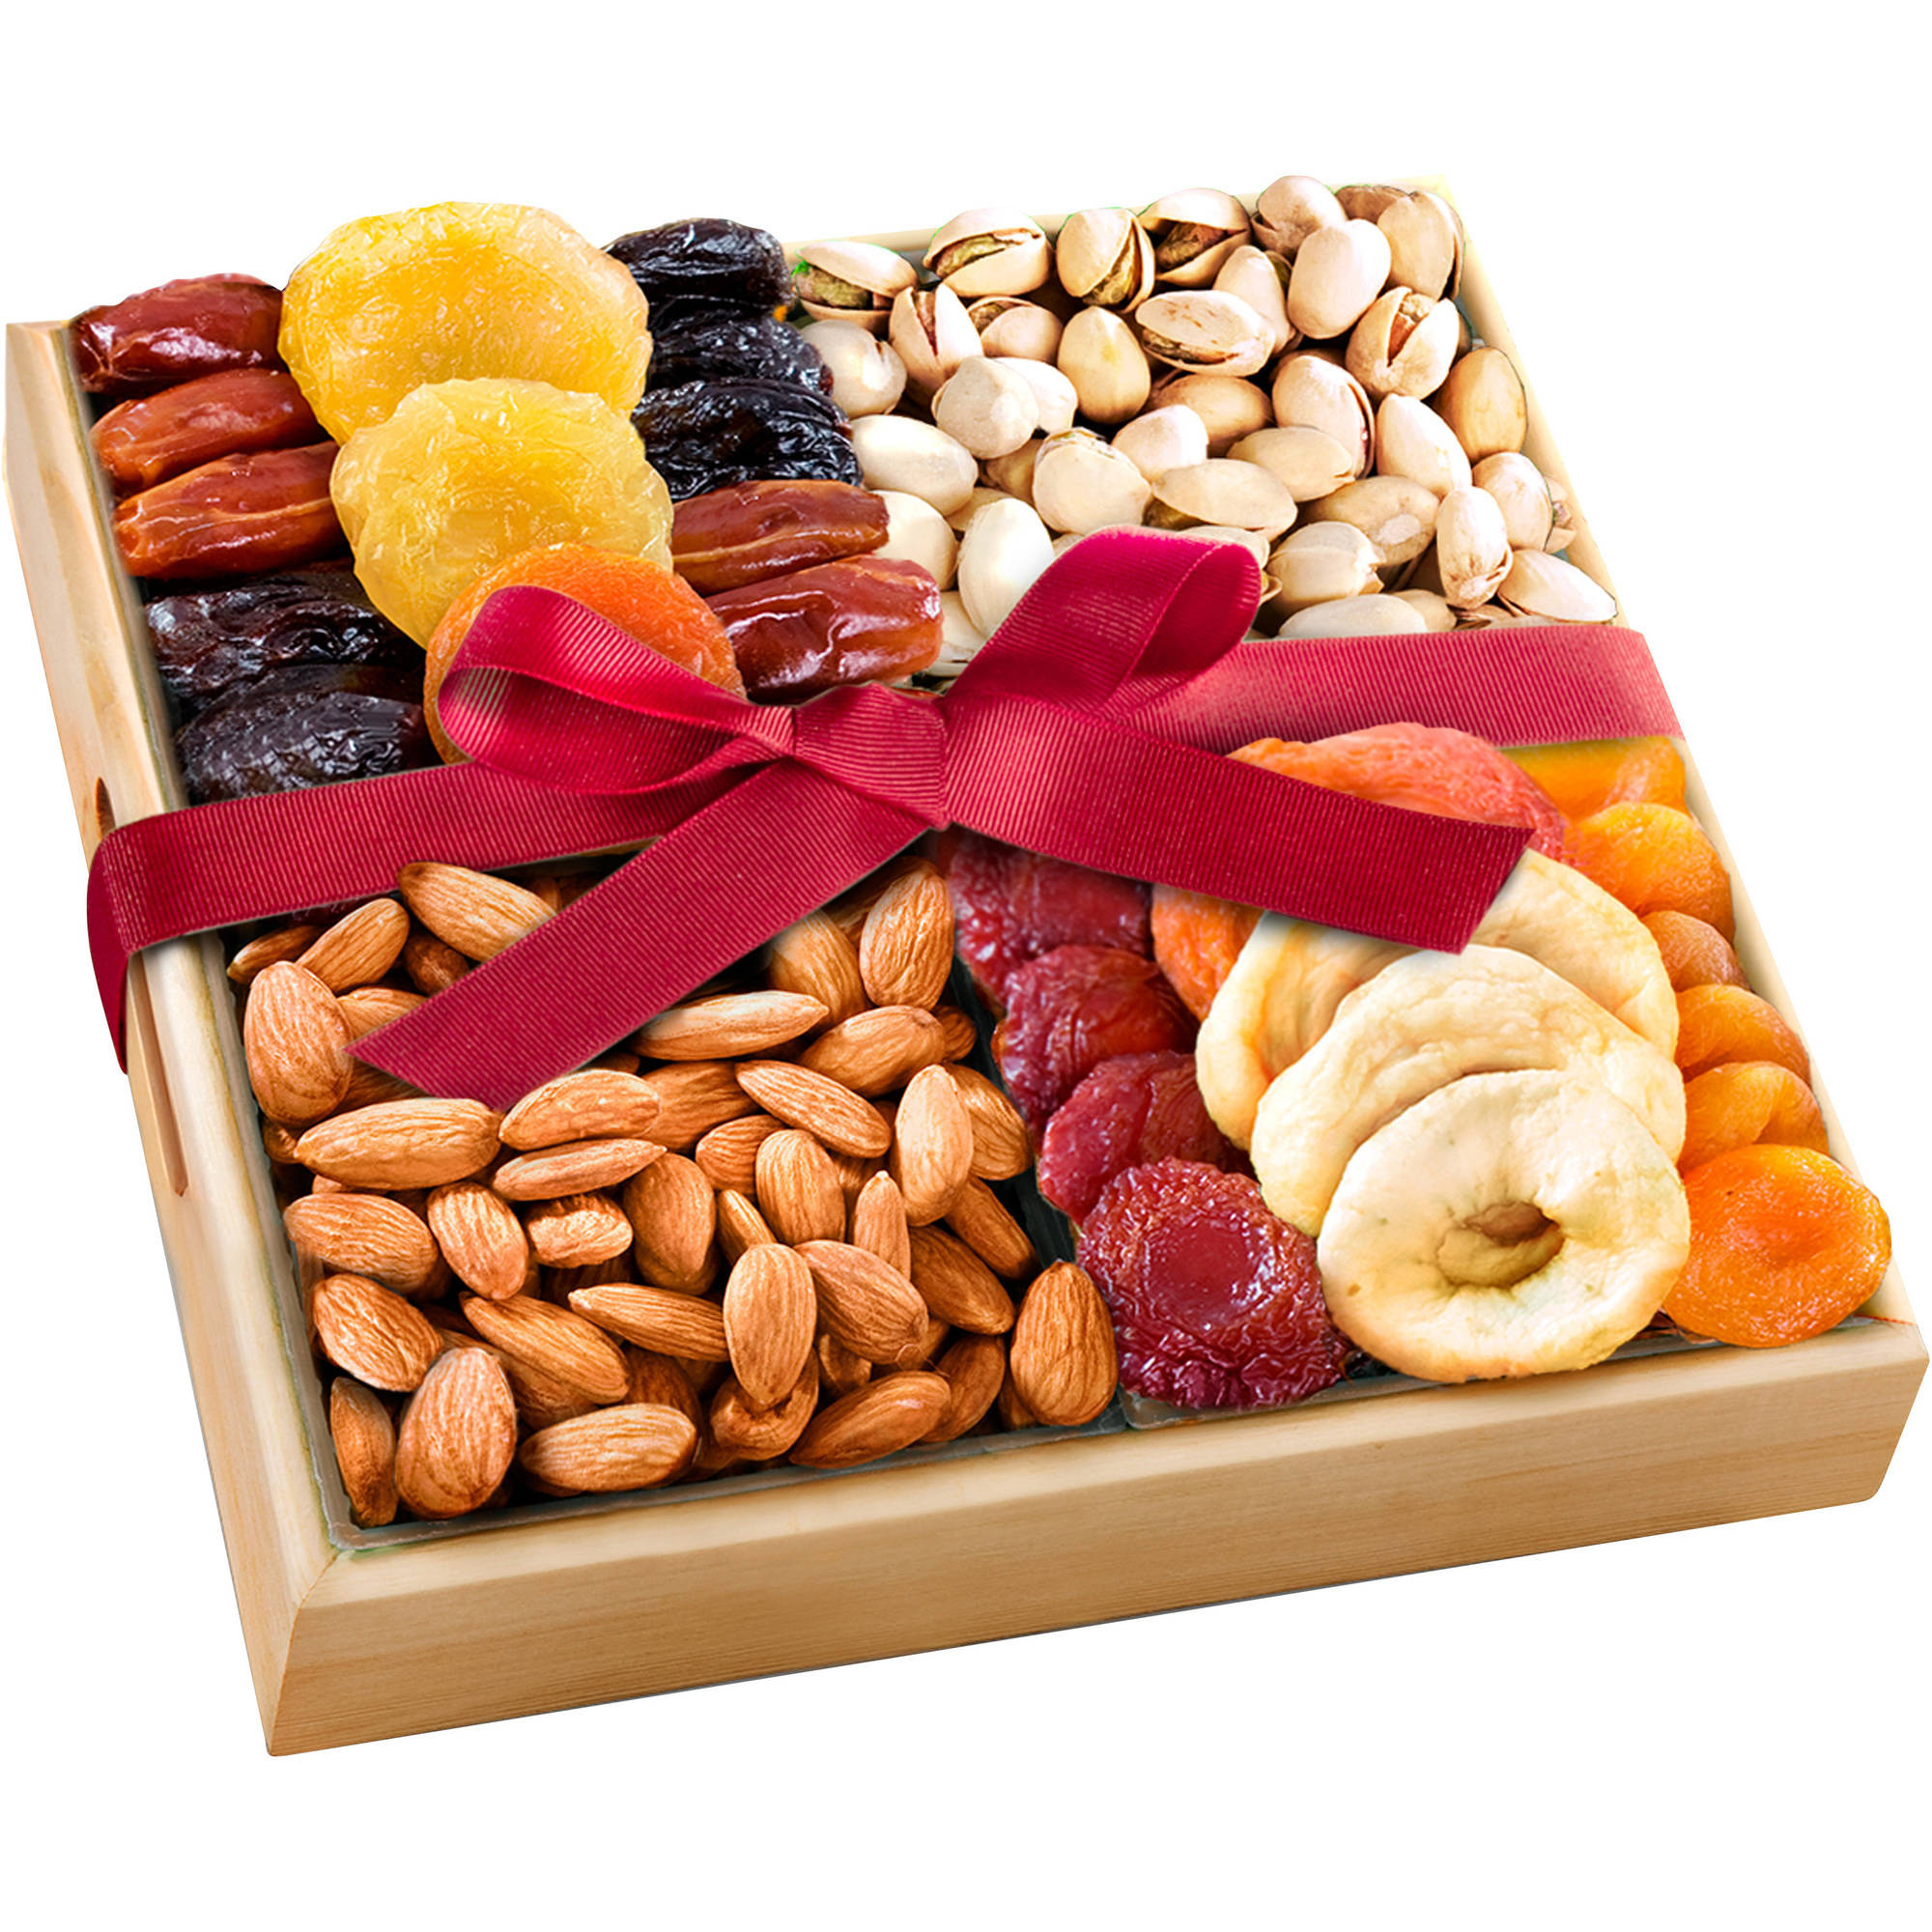 Golden State Fruit Gourmet Dried Fruit and Nut Assortment Gift Tray, 1 Pack - image 1 of 1